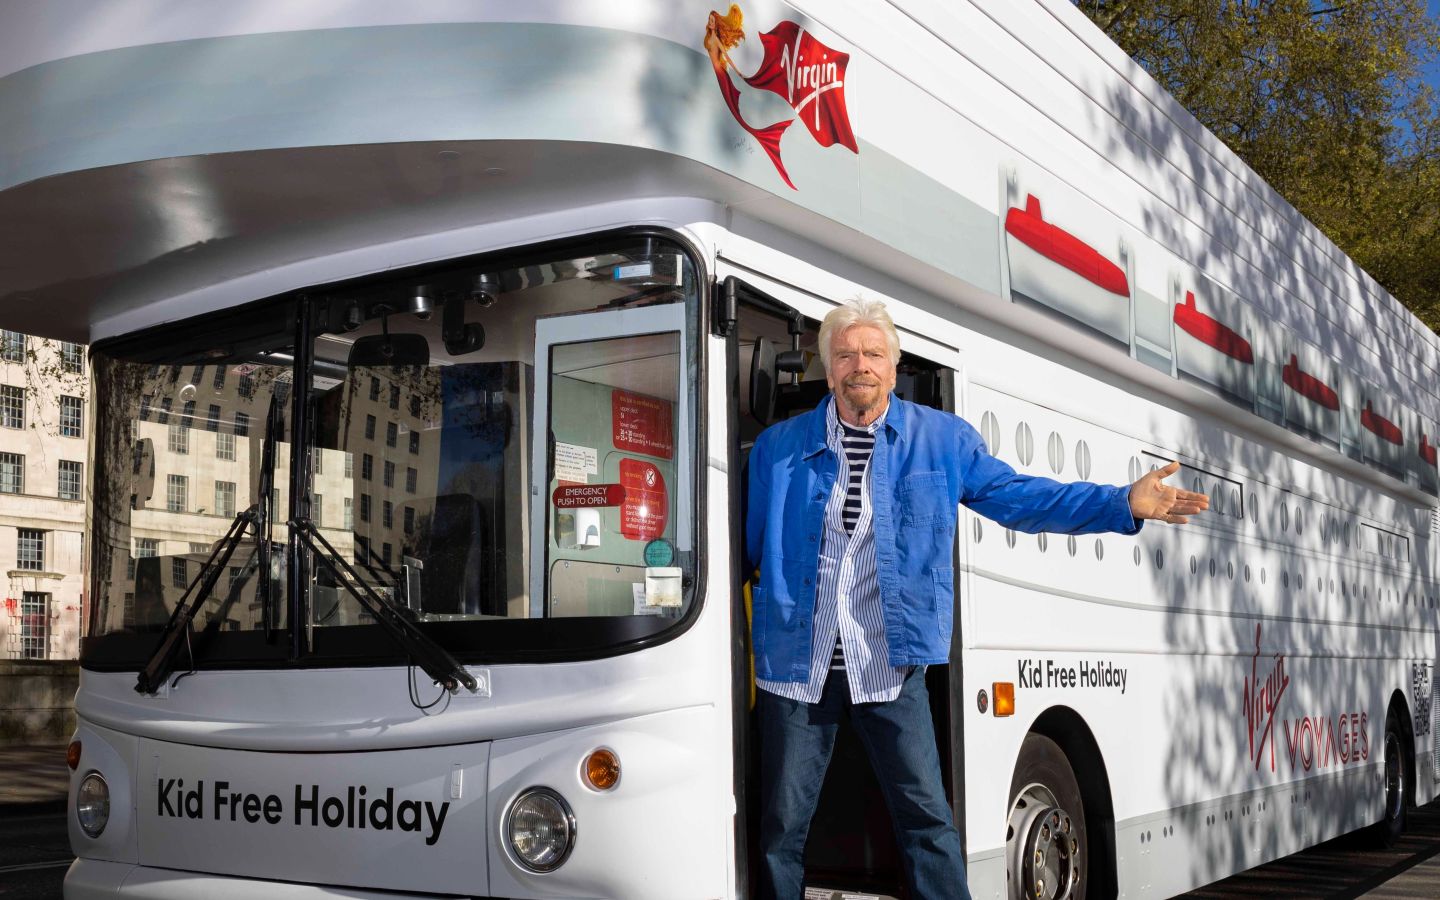 Virgin Voyages' in London with Richard Branson on a double decker ship